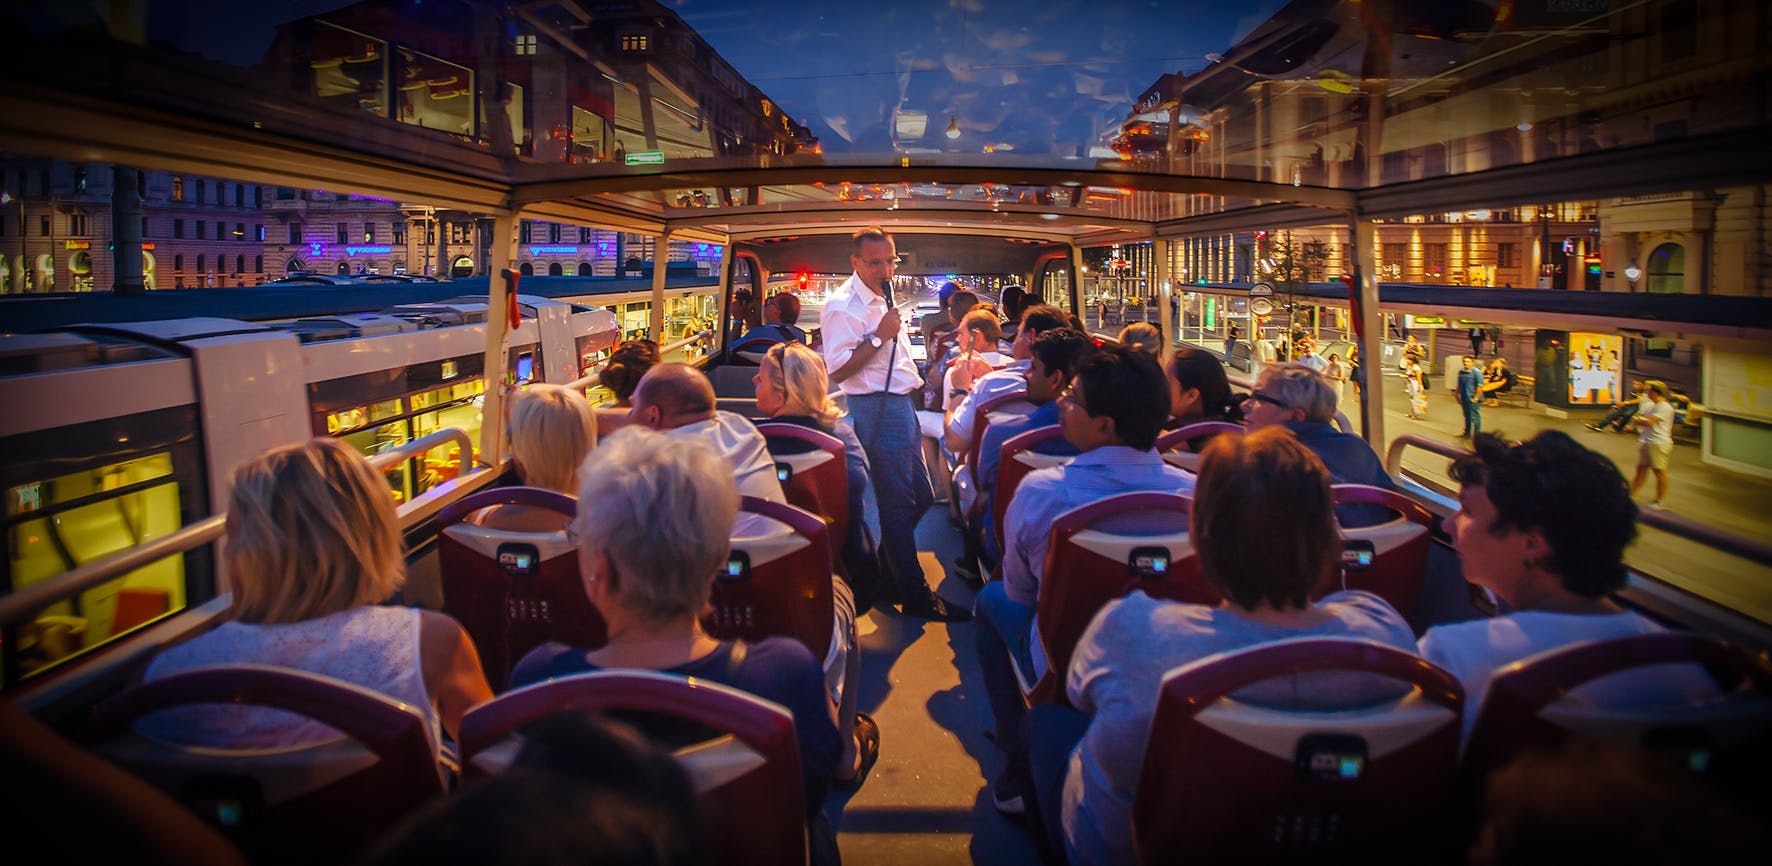 Evening sightseeing tour by bus in Berlin Musement